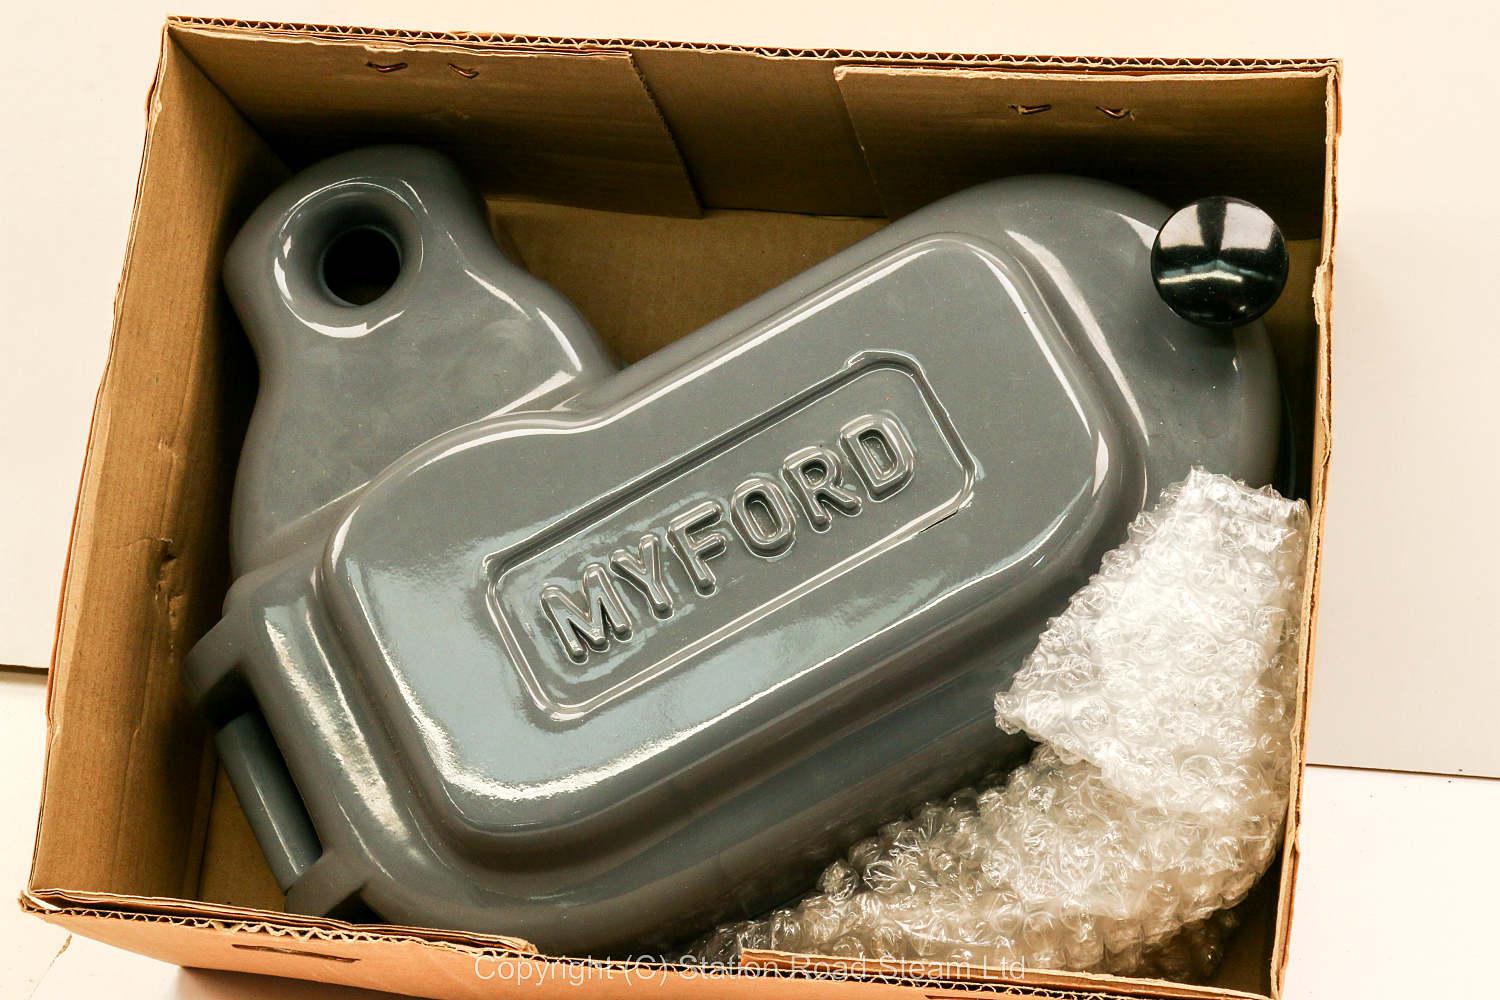 New, boxed Myford quick change gearbox